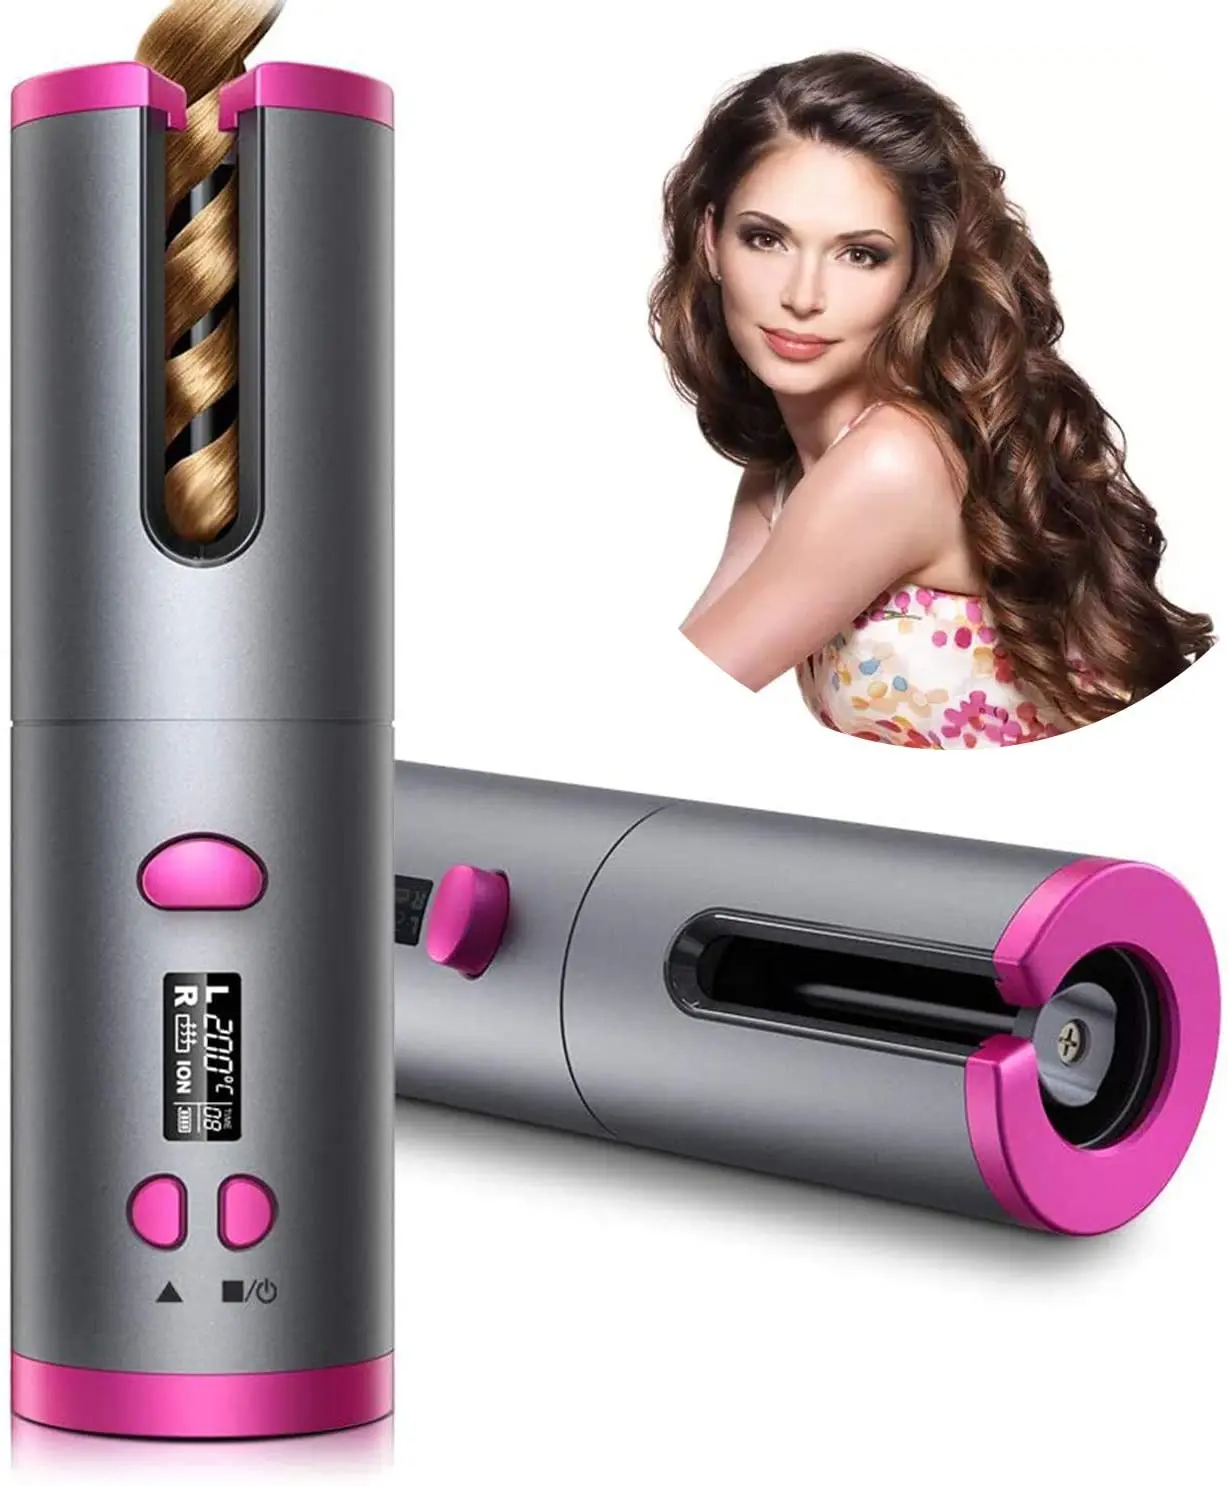 

Private Label Mini USB Rechargeable Auto Cordless Rotating Magic Hair Curler Wireless Electric Automatic Hair Curling Iron, White/rose gold/black or oem